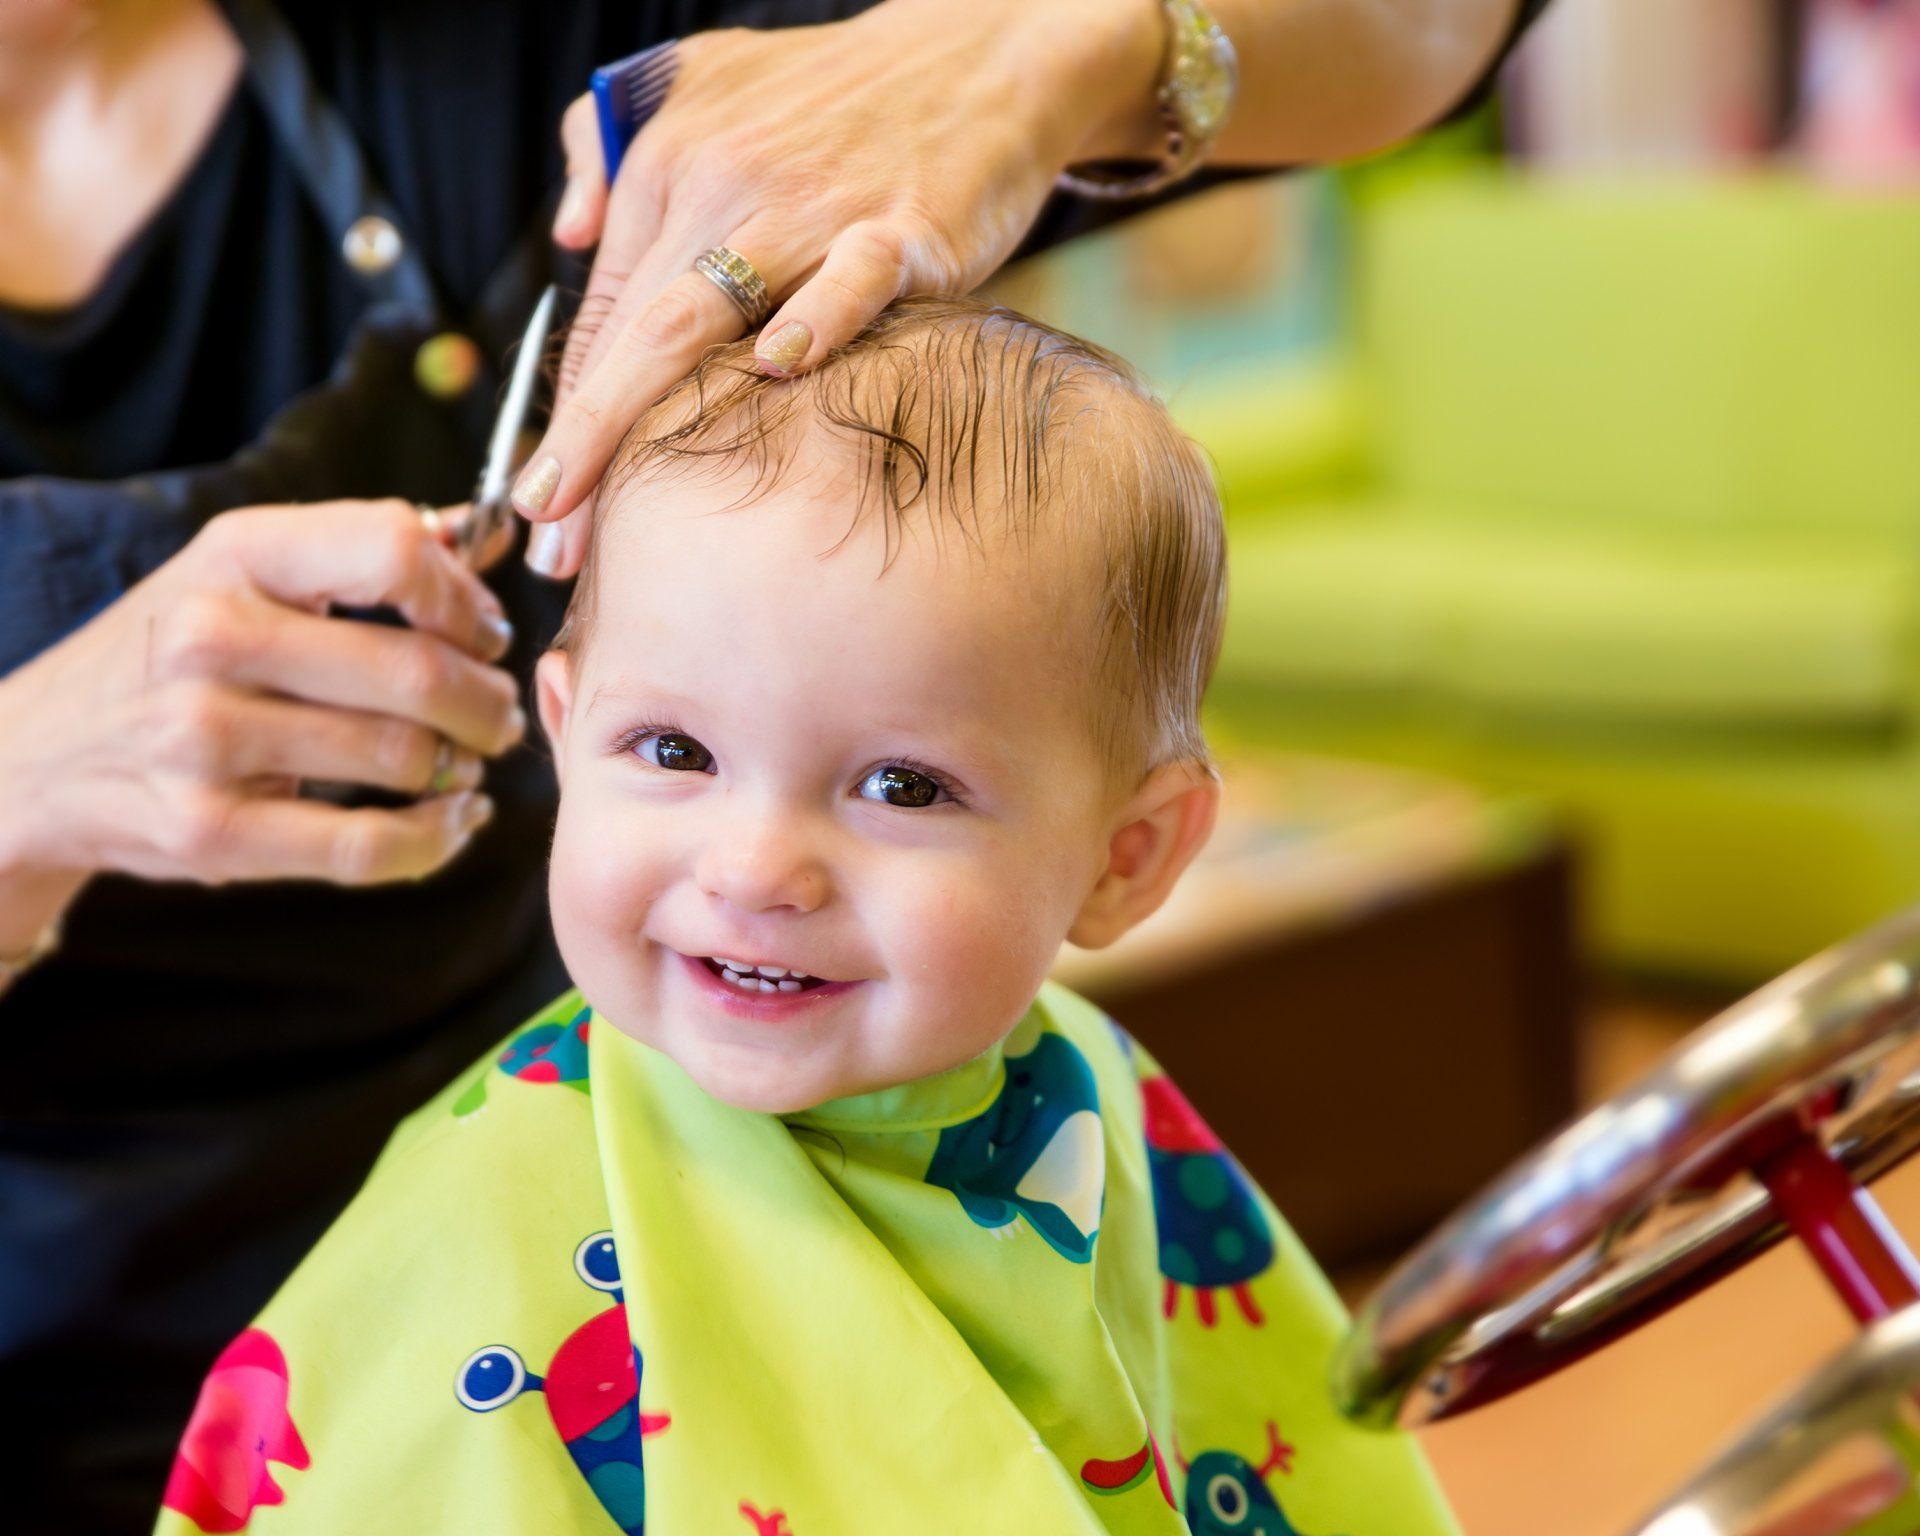 Happy toddler child getting his first haircut